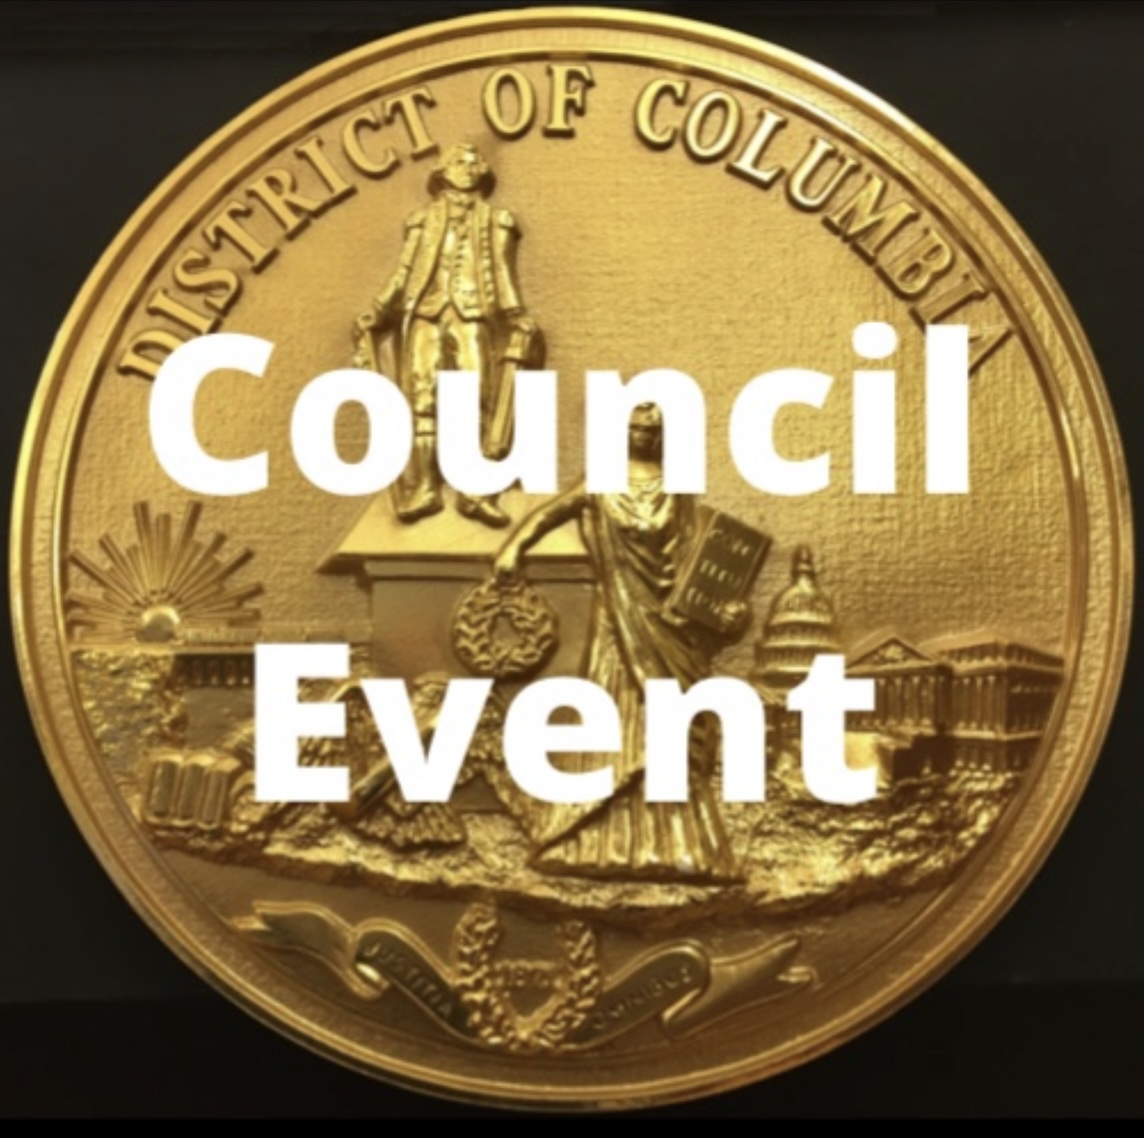 Tomorrow, Noon Budget Oversight Hearing - Criminal Code Reform Commission - Office of Neighborhood Safety and Engagement @ONSEDC_ - Office of the Attorney General @DCAttorneyGen dccouncil.gov/event/budget-o…